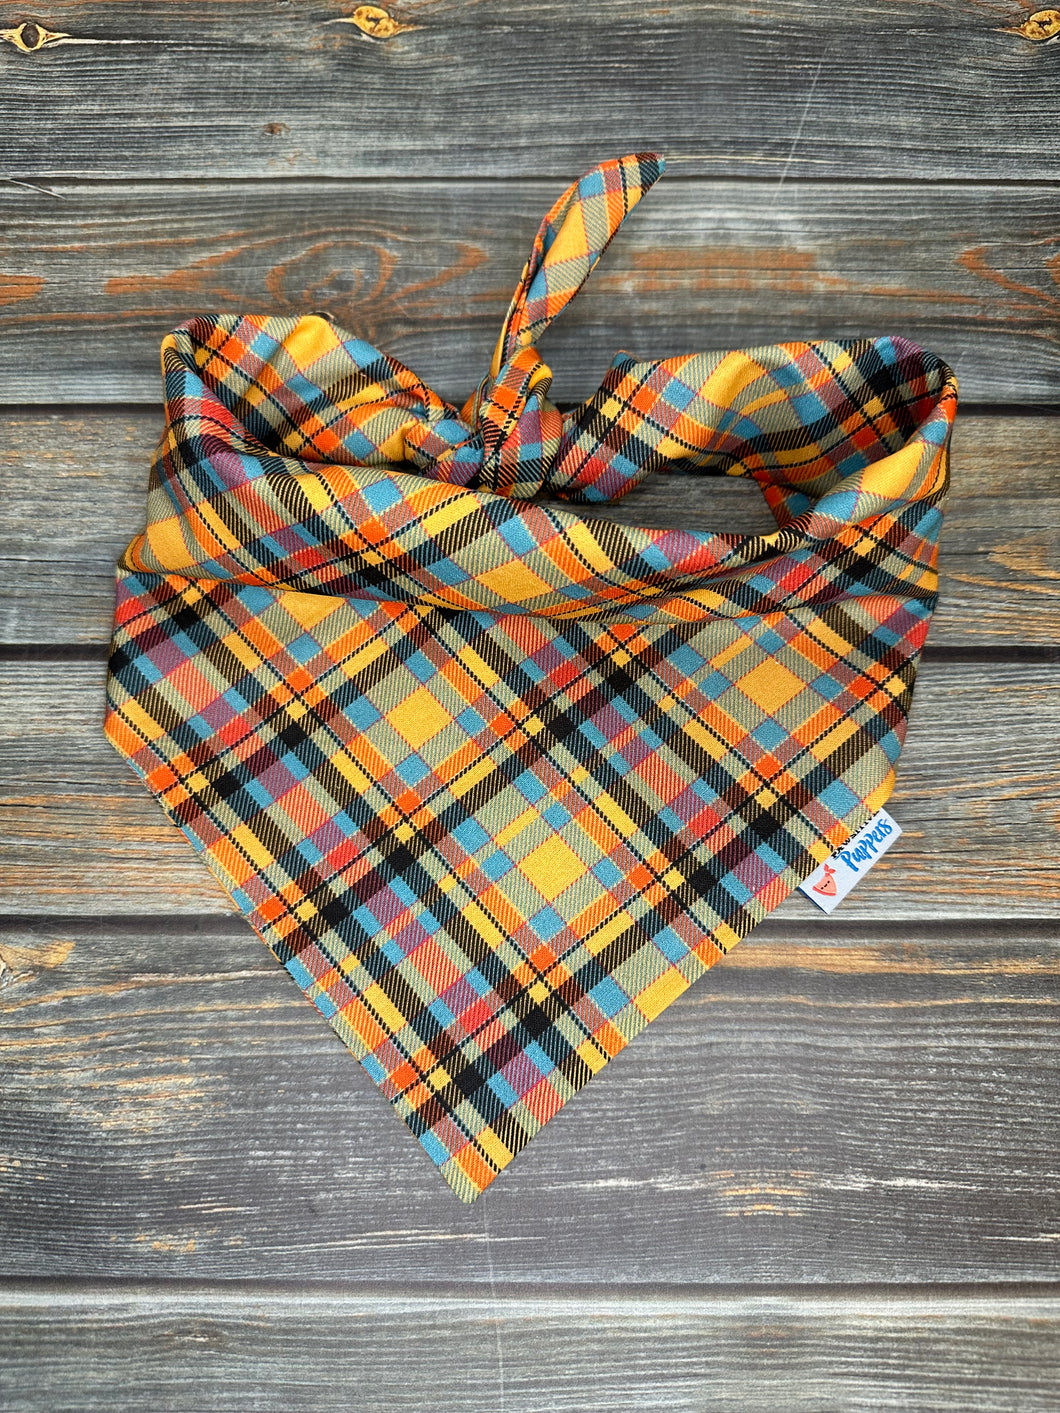 Perfect for Fall Plaid